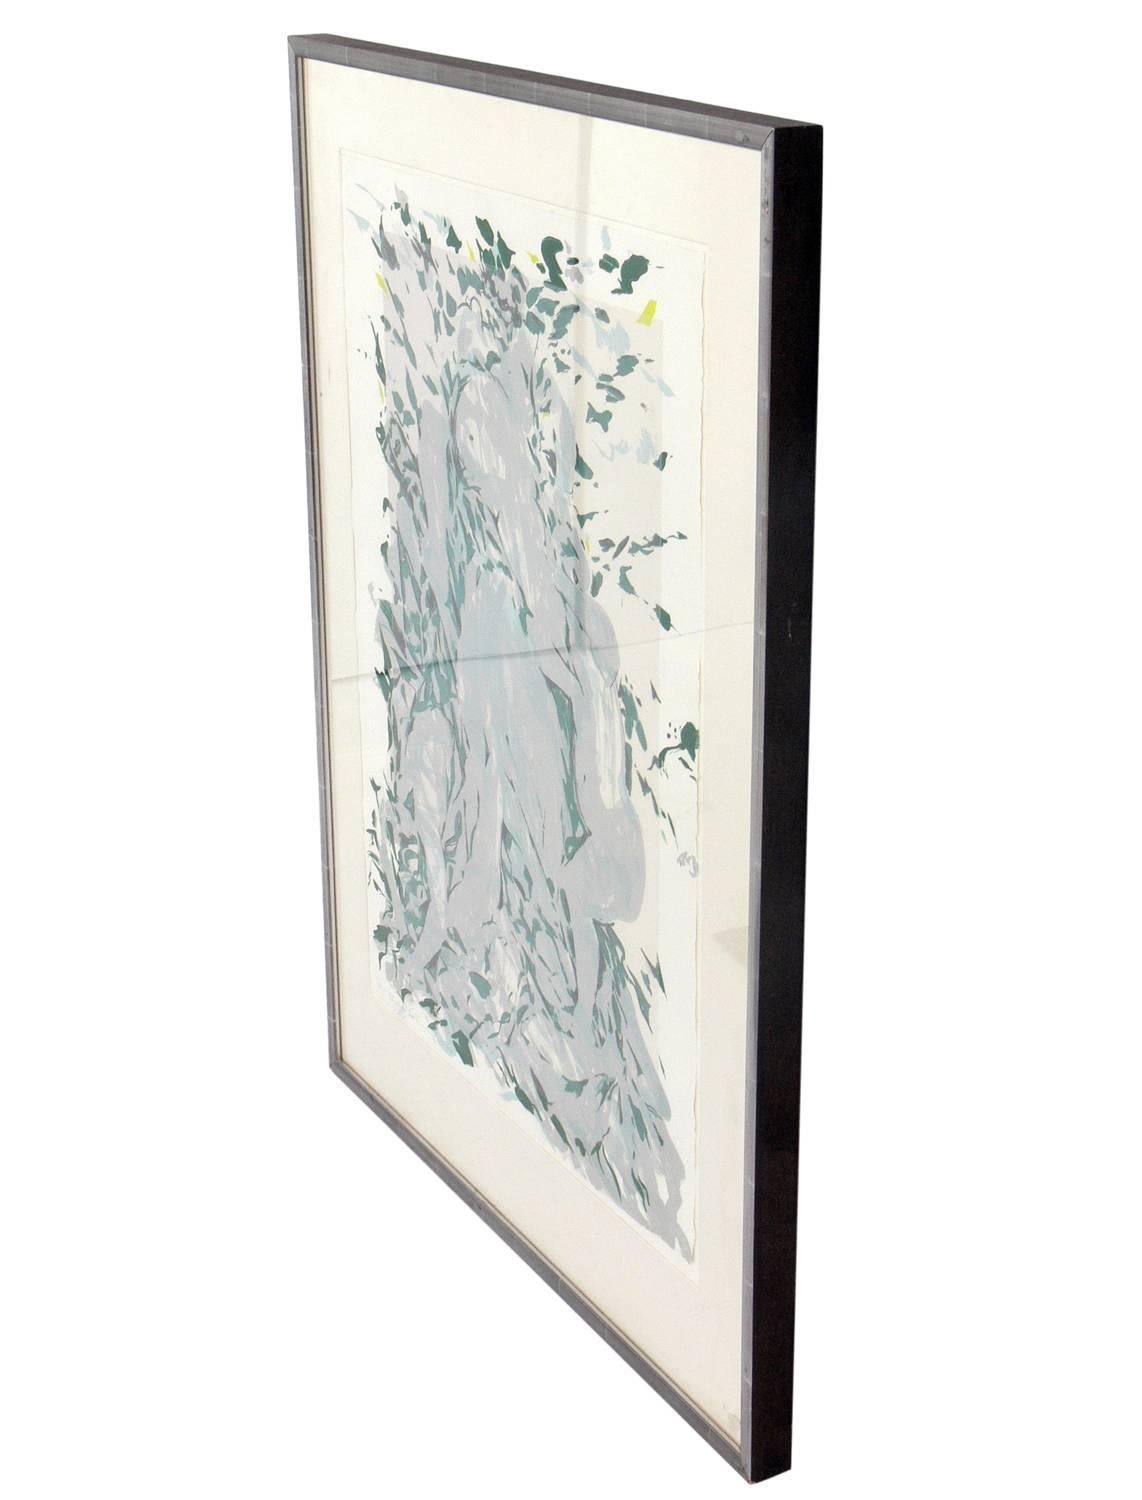 Abstract lithograph by Elaine de Kooning, American, circa 1977. Signed and dated by the artist, from a very limited edition, this is number 30 of only 70 executed. Retains it's period silver leafed wood frame.